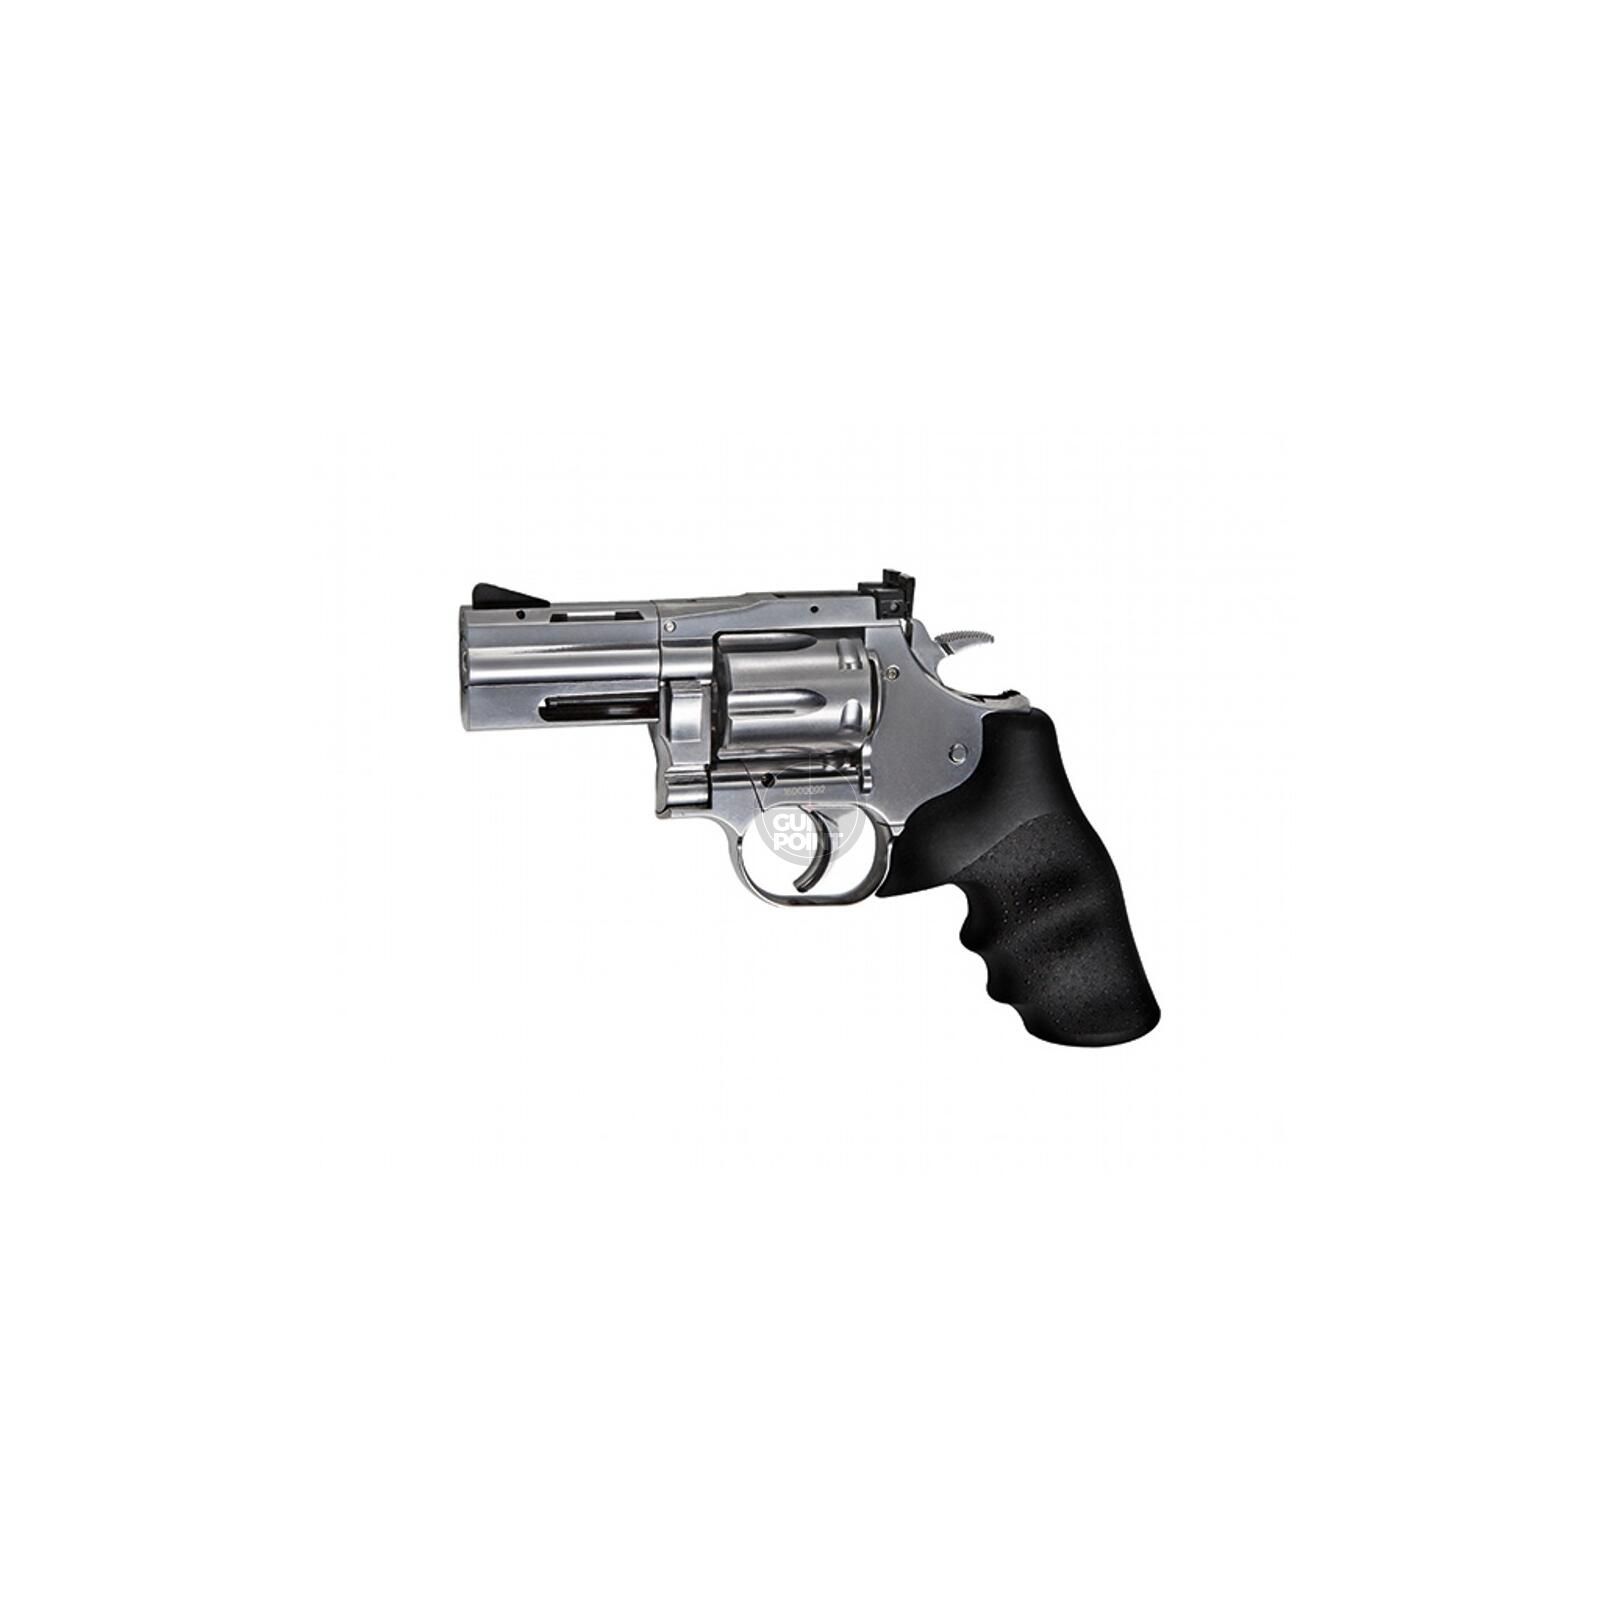 Luftpistole - Dan Wesson 715 2.5 Co2-System NBB Silber - Kal. 4,5 mm